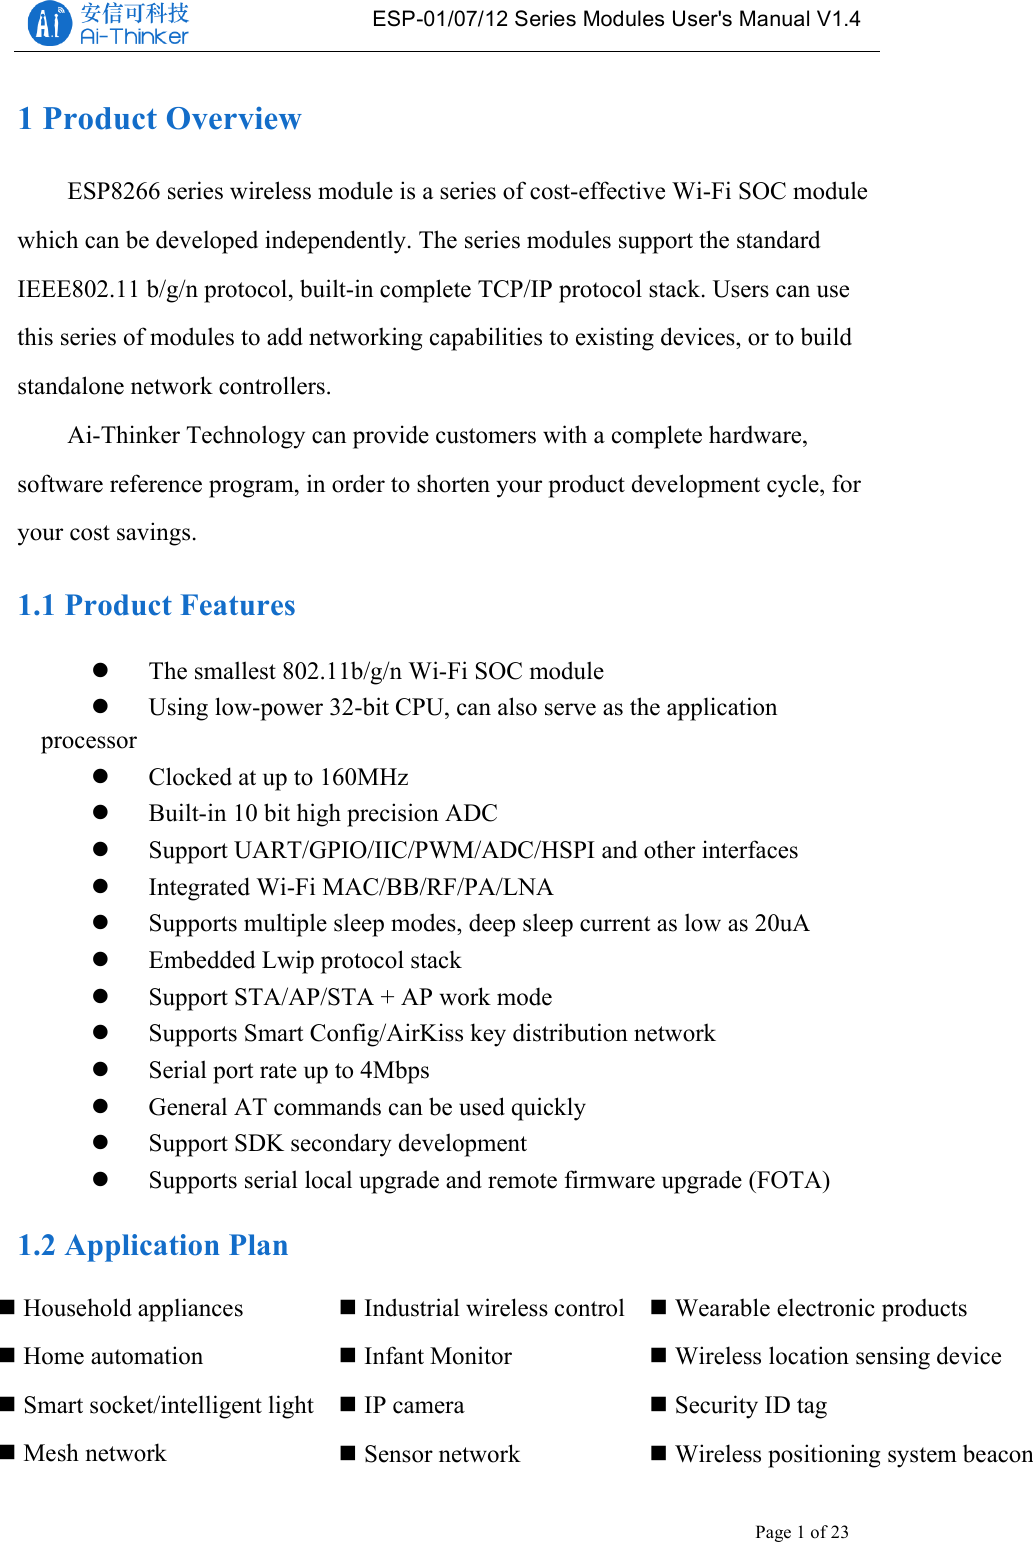   ESP-01/07/12 Series Modules User&apos;s Manual V1.4 Copyright © 2017 Shenzhen Ai-Thinker Technology Co., Ltd All Rights Reserved Page 1 of 23   1 Product Overview ESP8266 series wireless module is a series of cost-effective Wi-Fi SOC module which can be developed independently. The series modules support the standard IEEE802.11 b/g/n protocol, built-in complete TCP/IP protocol stack. Users can use this series of modules to add networking capabilities to existing devices, or to build standalone network controllers. Ai-Thinker Technology can provide customers with a complete hardware, software reference program, in order to shorten your product development cycle, for your cost savings. 1.1 Product Features ! The smallest 802.11b/g/n Wi-Fi SOC module ! Using low-power 32-bit CPU, can also serve as the application processor ! Clocked at up to 160MHz ! Built-in 10 bit high precision ADC ! Support UART/GPIO/IIC/PWM/ADC/HSPI and other interfaces ! Integrated Wi-Fi MAC/BB/RF/PA/LNA ! Supports multiple sleep modes, deep sleep current as low as 20uA ! Embedded Lwip protocol stack ! Support STA/AP/STA + AP work mode ! Supports Smart Config/AirKiss key distribution network ! Serial port rate up to 4Mbps ! General AT commands can be used quickly ! Support SDK secondary development ! Supports serial local upgrade and remote firmware upgrade (FOTA) 1.2 Application Plan    !Industrial wireless control !Infant Monitor !IP camera !Sensor network !Household appliances !Home automation !Smart socket/intelligent light !Mesh network !Wearable electronic products !Wireless location sensing device !Security ID tag !Wireless positioning system beacon 